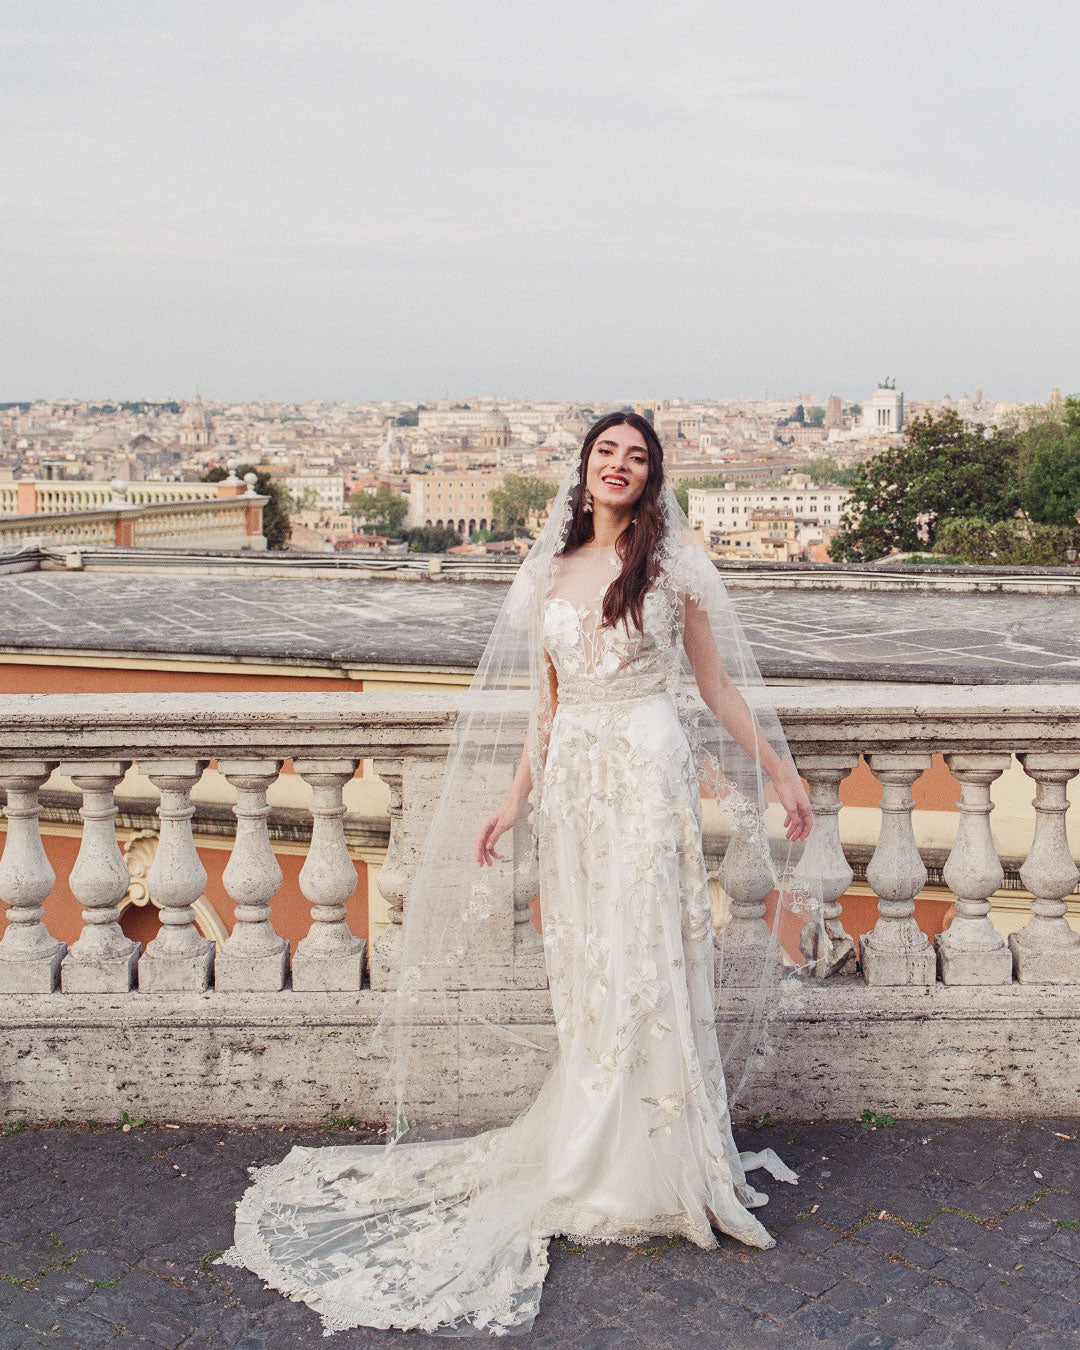 Chloris wedding dress and veil by Claire Pettibone Italy Location 